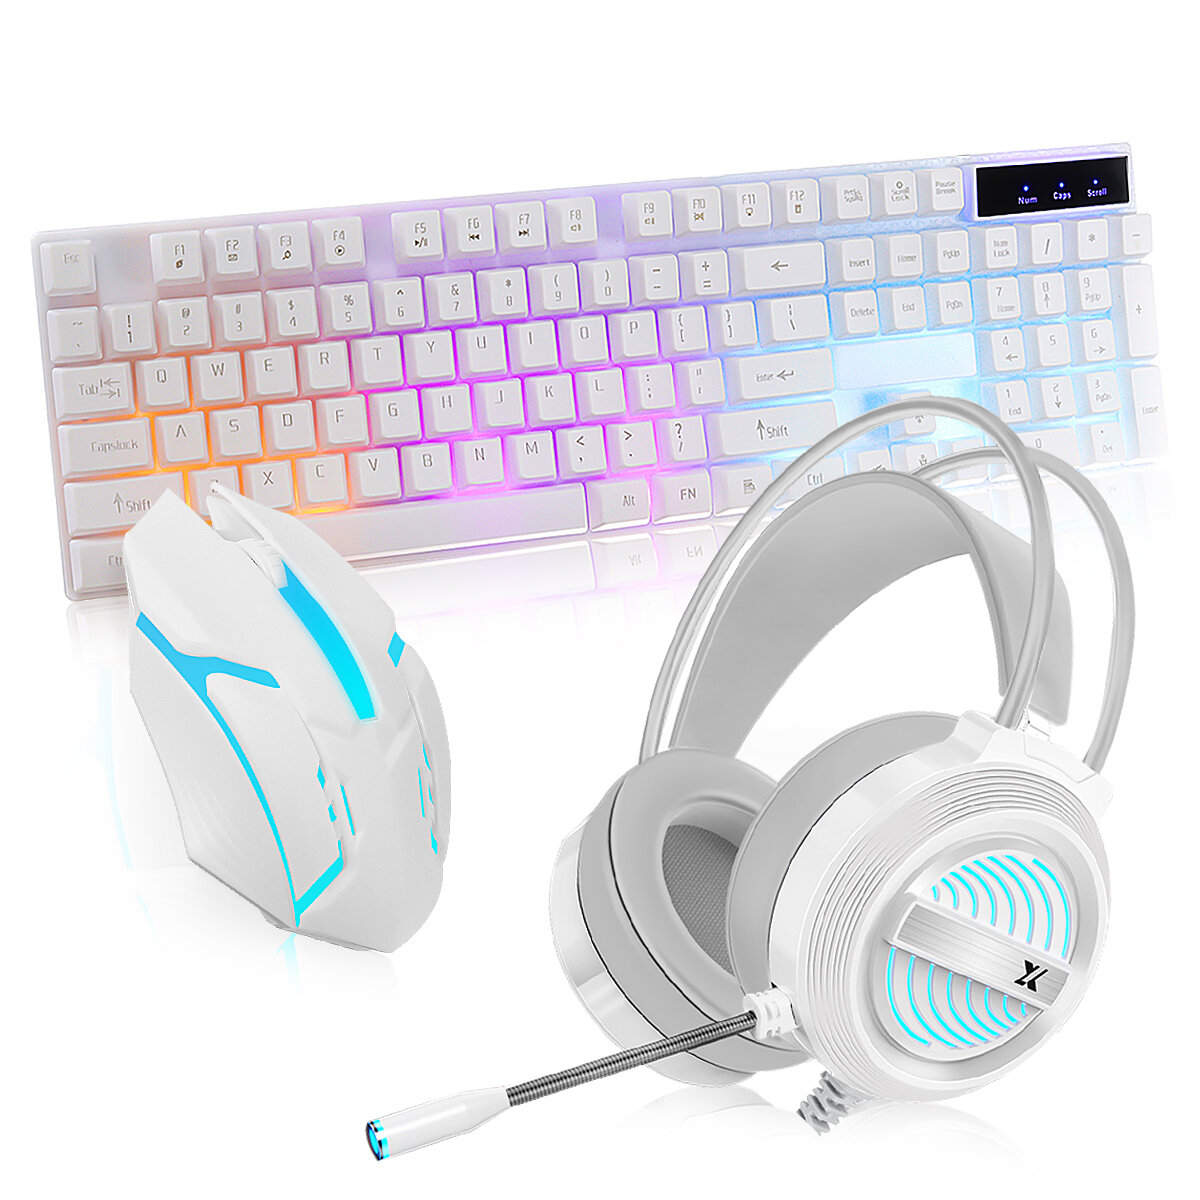 3Pcs Gaming Keyboard & Mouse Headset Combo 104 Keys RGB Backlit Waterproof Mechanical Feeling Keyboard Ergonomic Mouse USB Wired LED PC Gaming Headset with Microphone for Computer Gamer Home Office